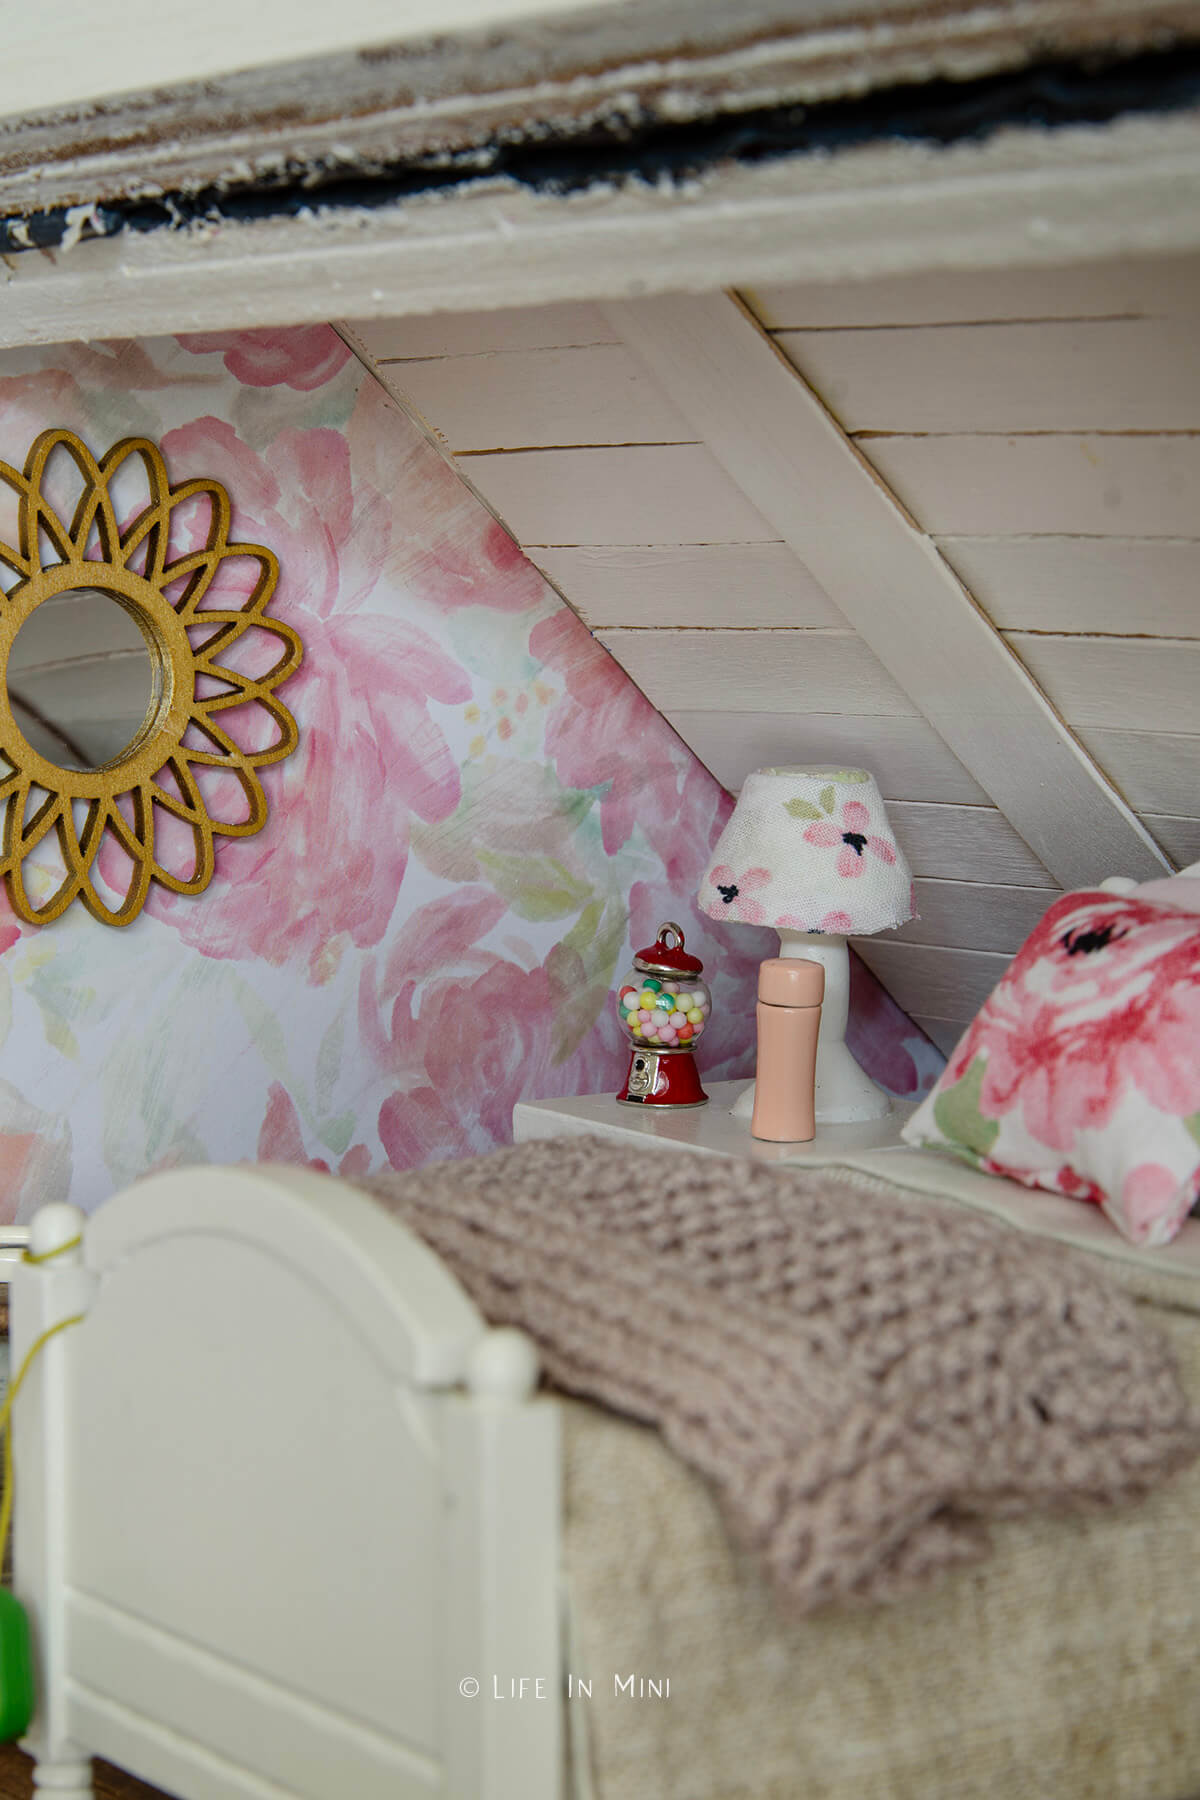 Closeup of a nightstand in a dollhouse bedroom with floral wall paper in the background